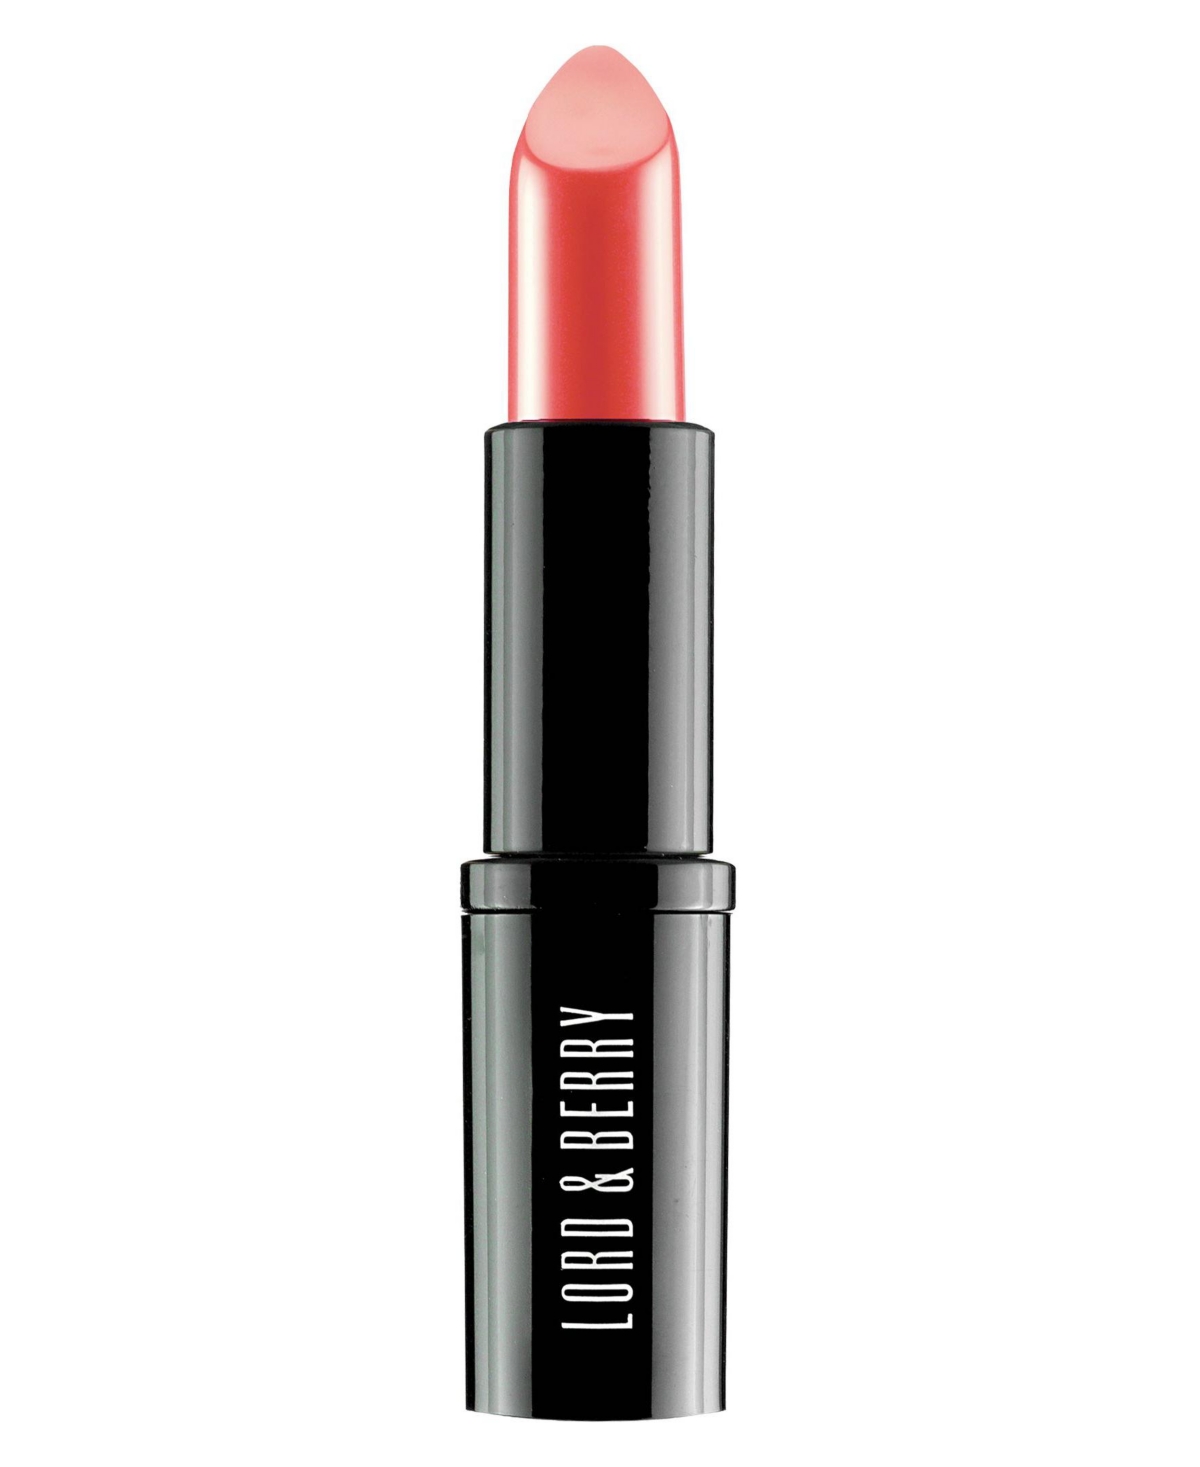 Lord & Berry Vogue Matte Lipstick In Euphoria - Lively Pink Coral